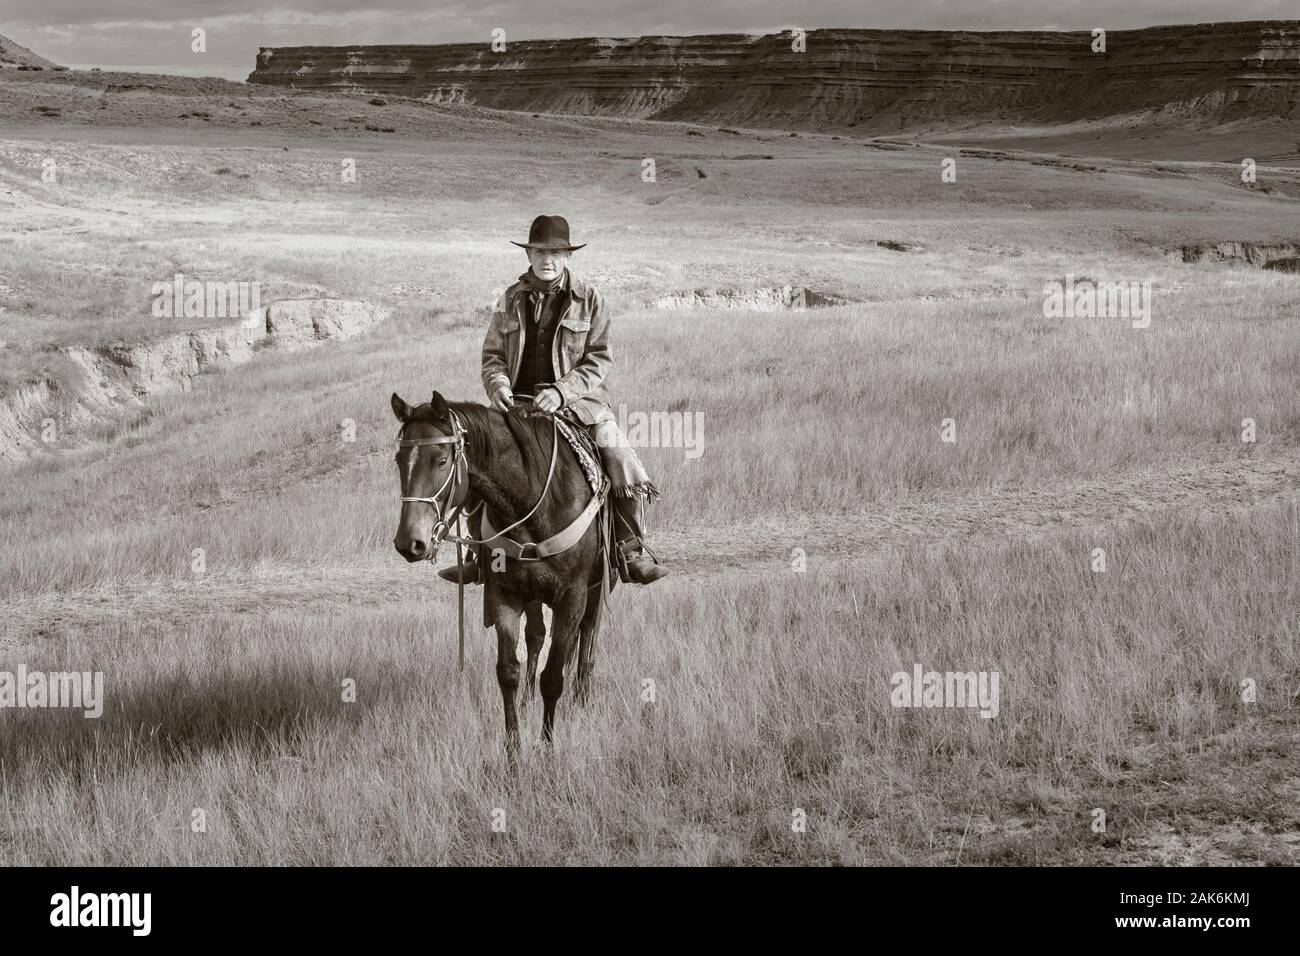 WY04133-00-BW...WYOMING - Ord Buckingham with his horse on the Willow Creek Ranch.  MR# B20 Stock Photo